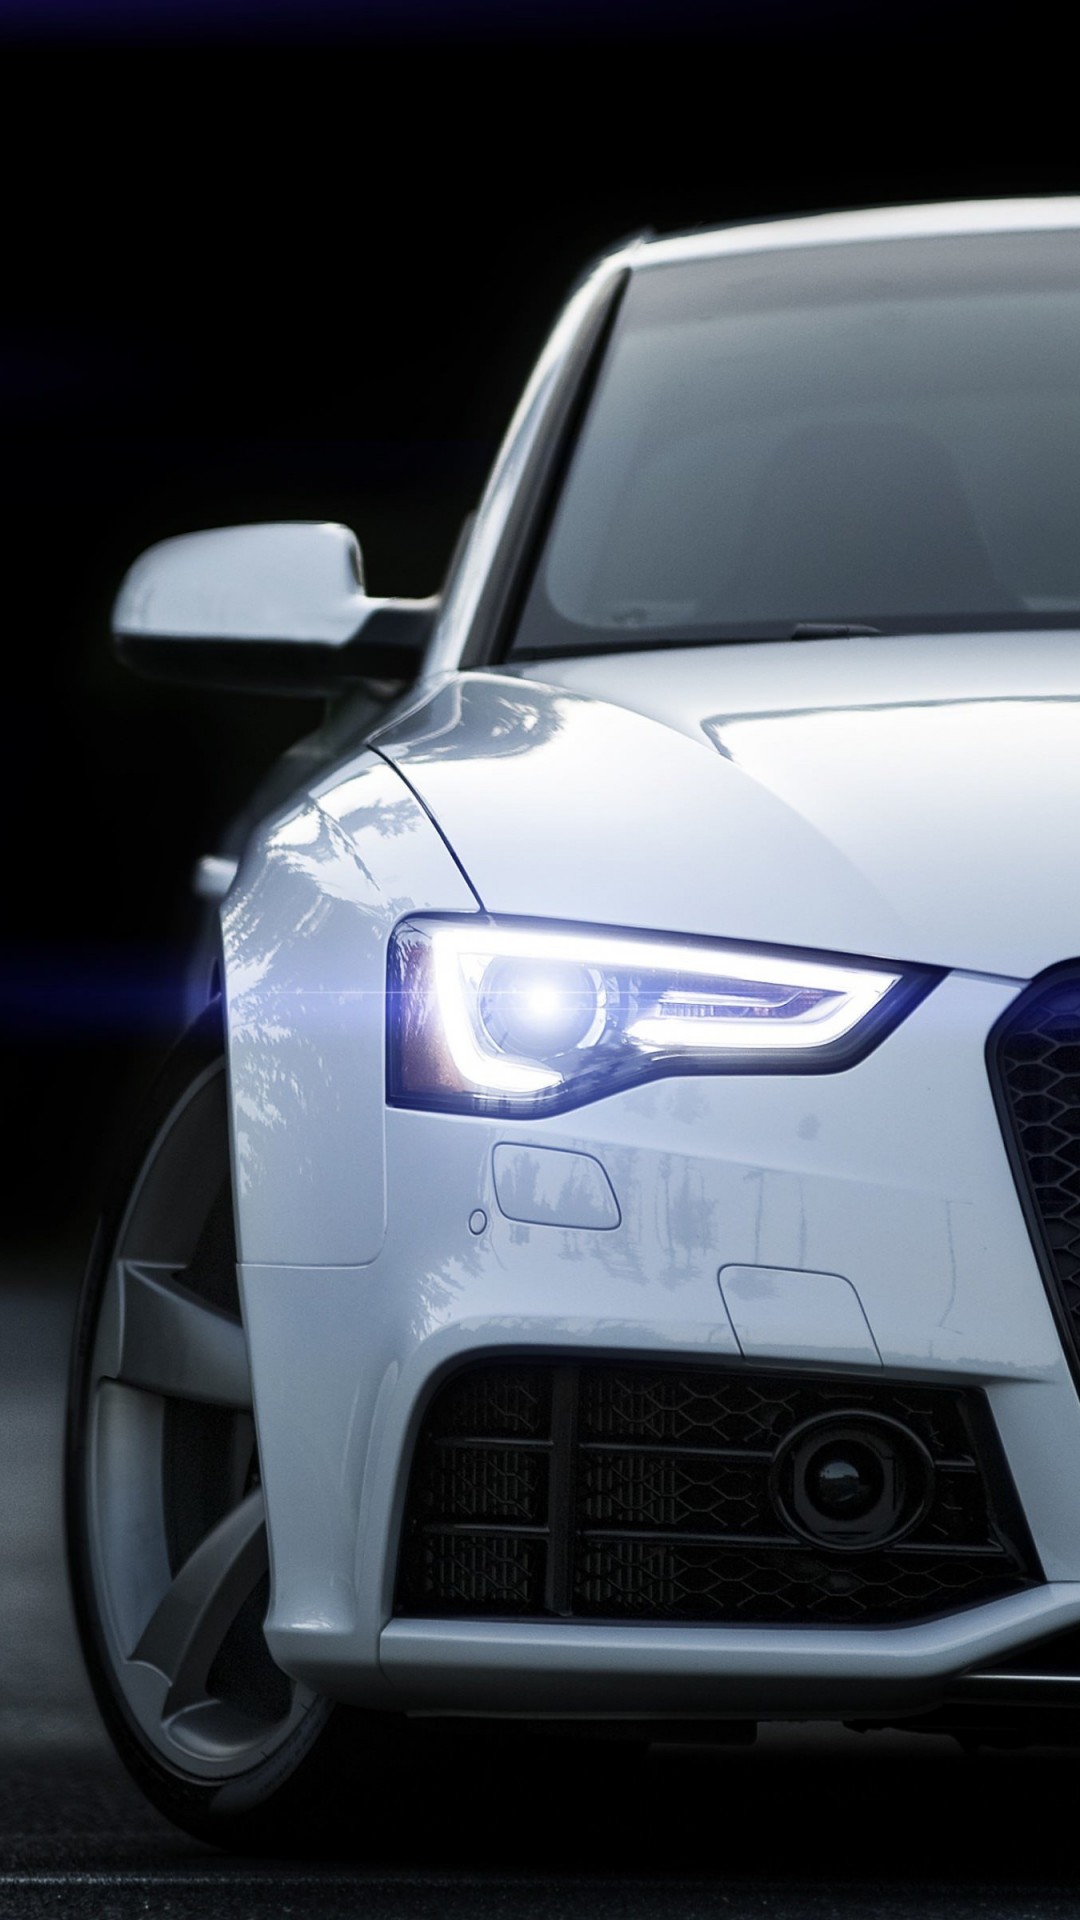 2015 Audi RS 5 Coupe Wallpaper for LG G2